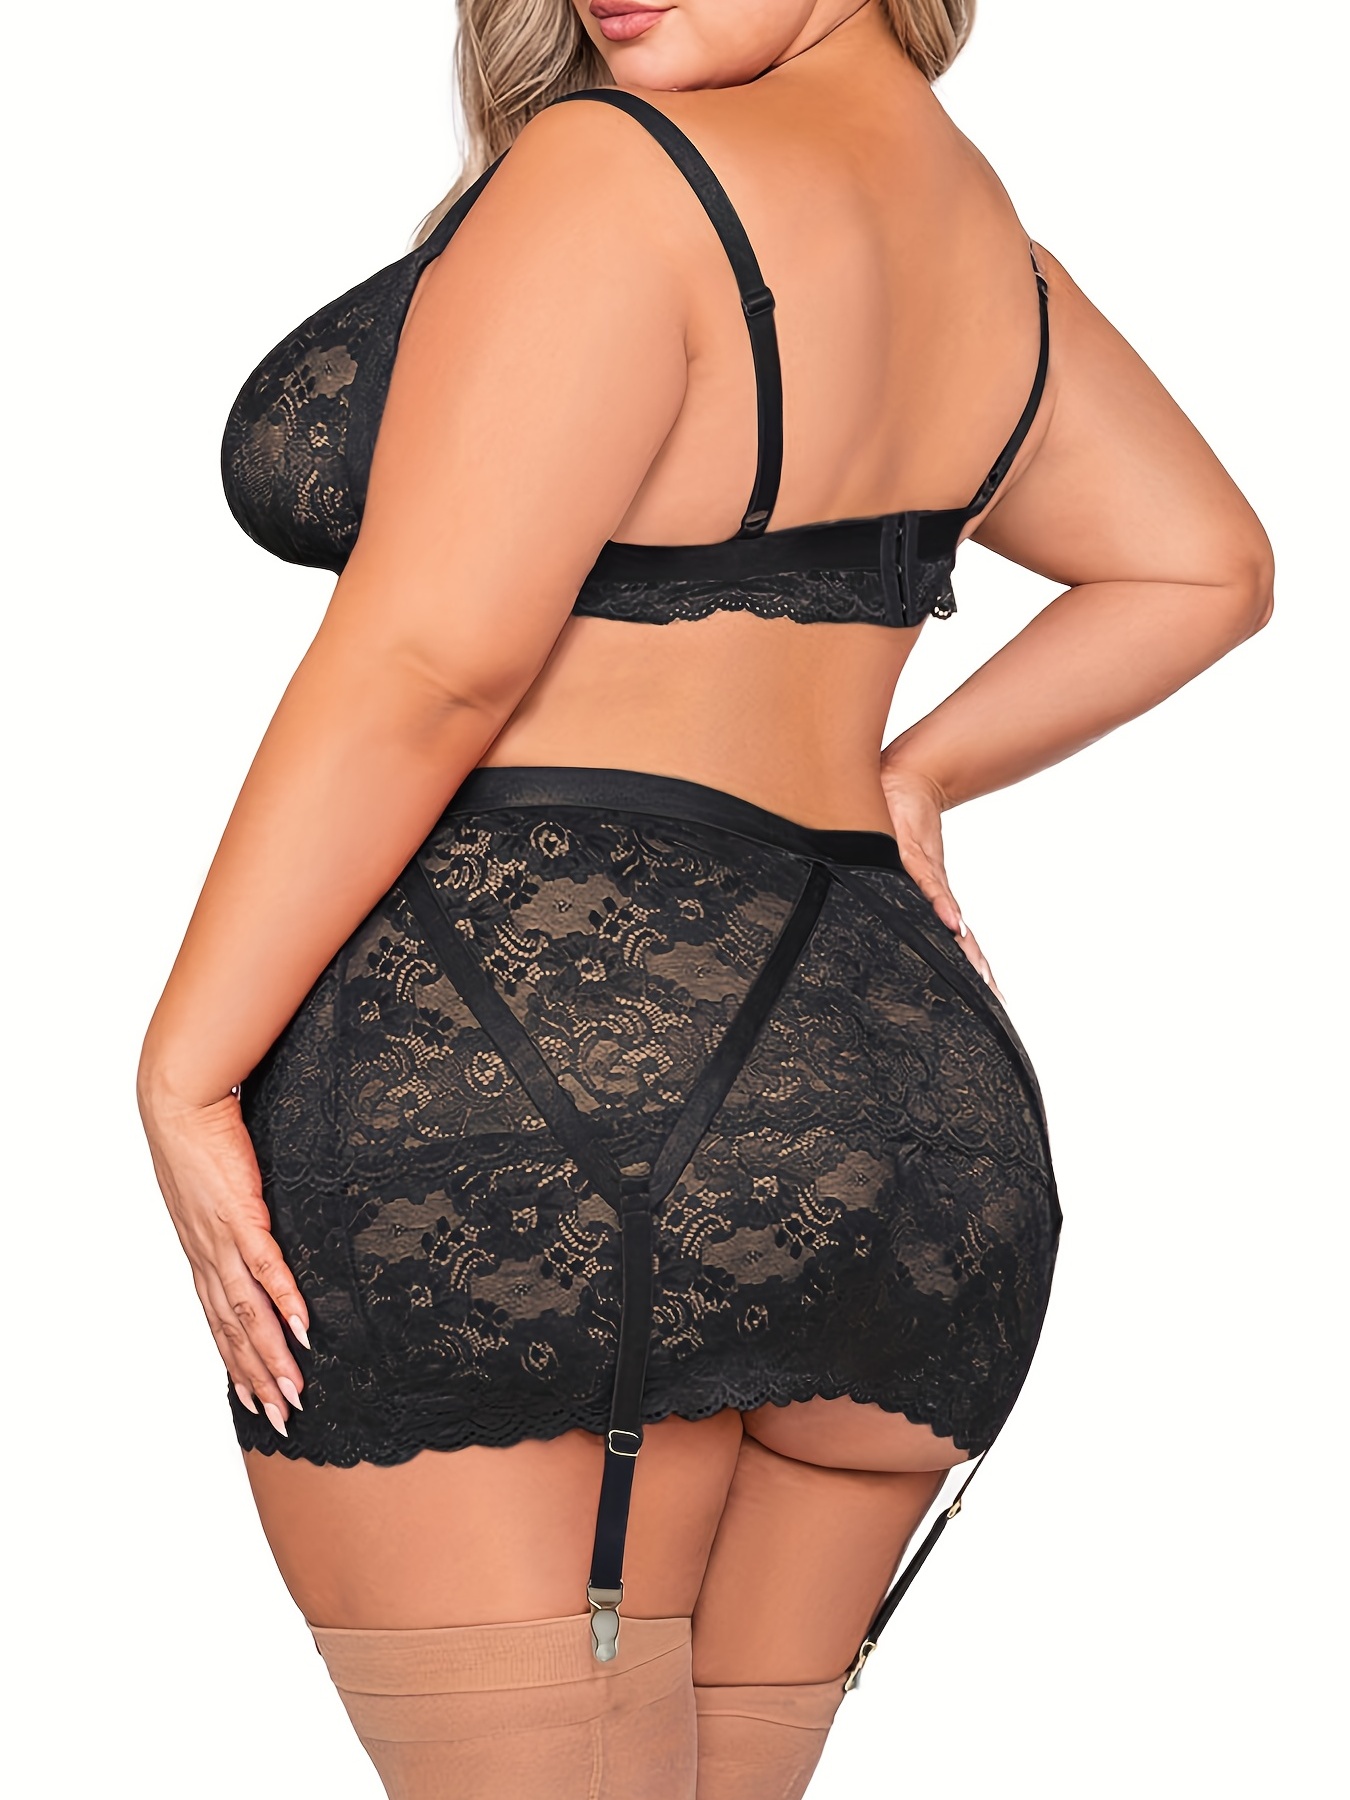  Lingerie for Women Sexy Naughty Plus Size Women